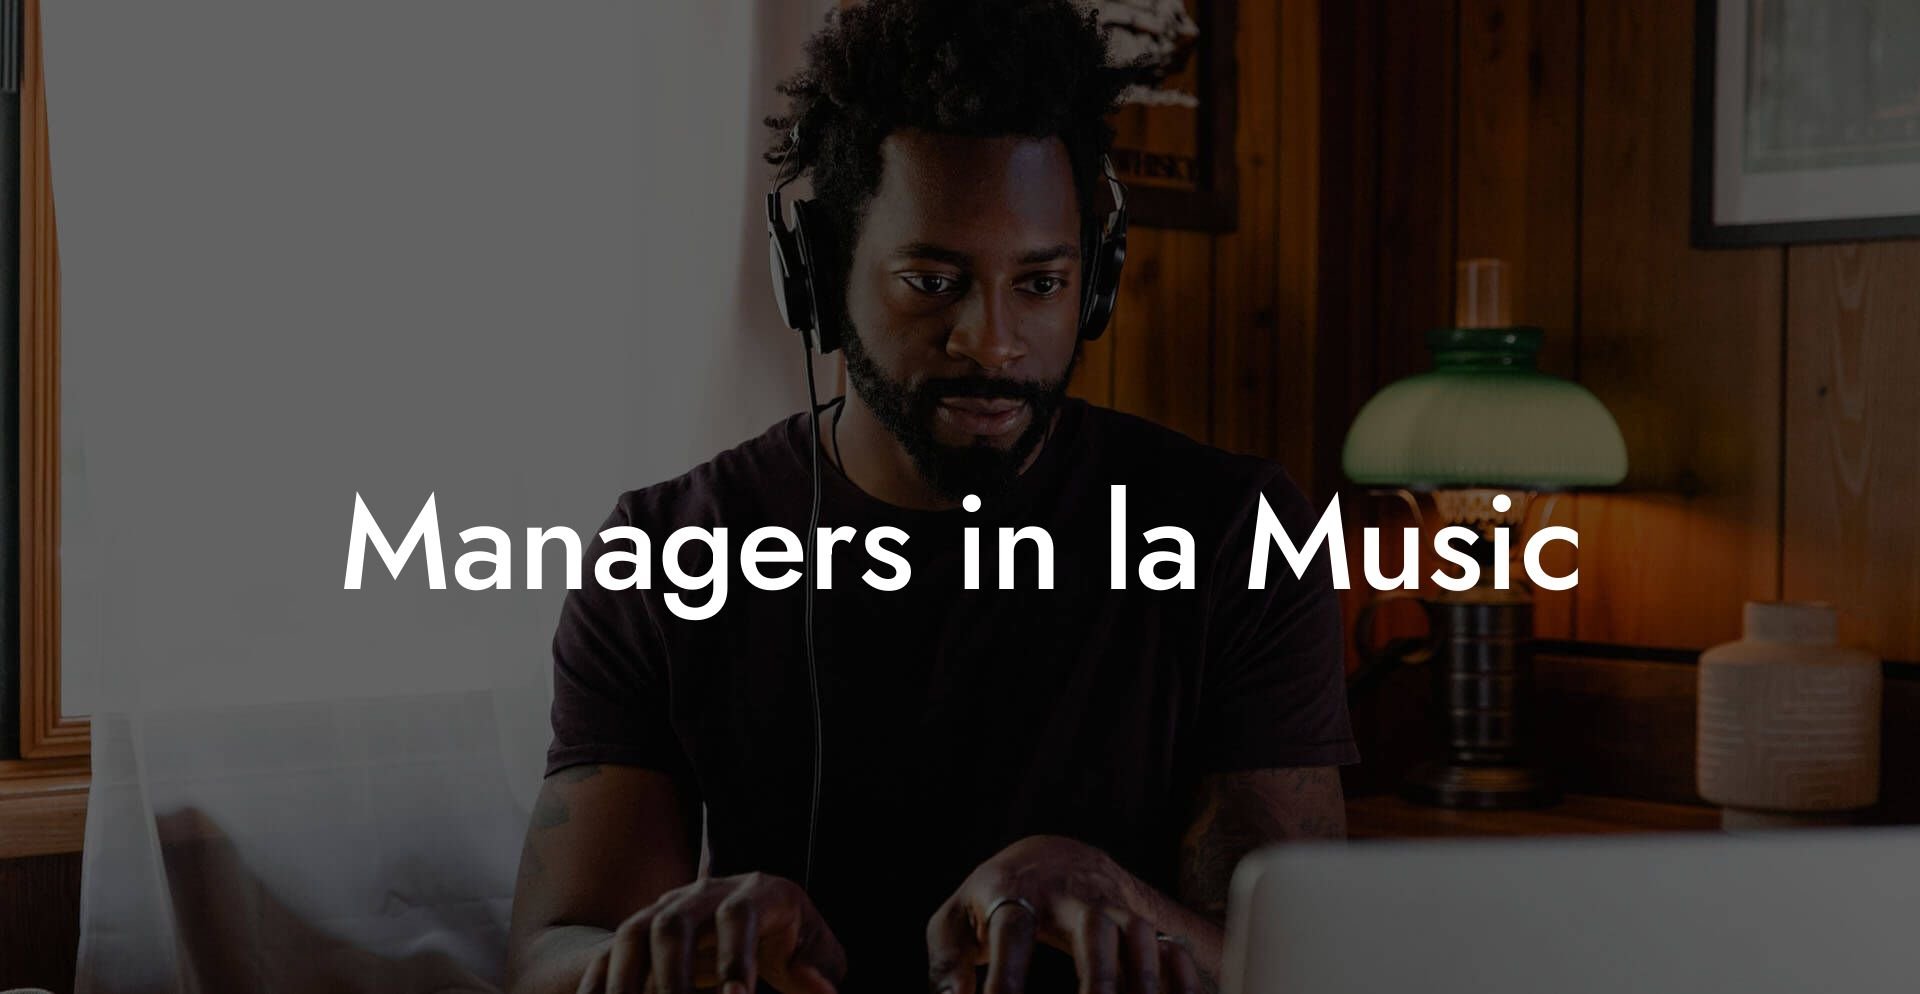 Managers in la Music